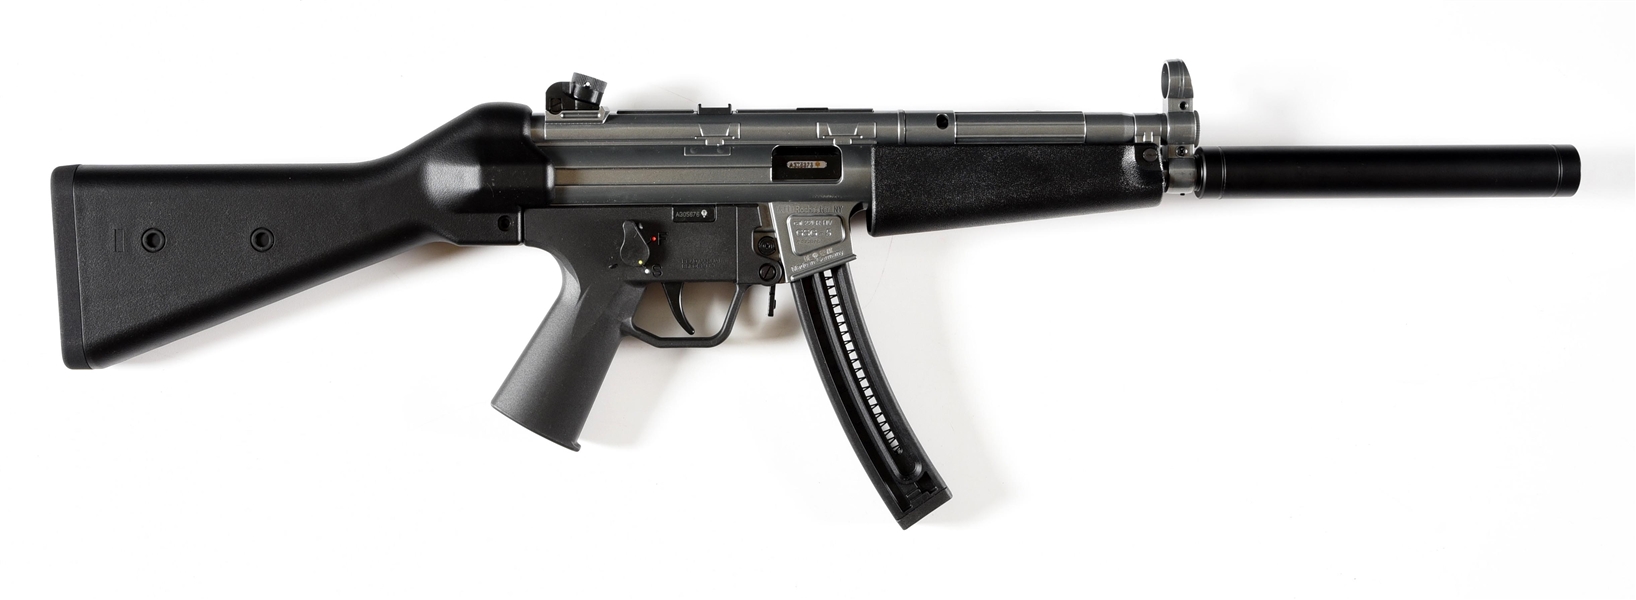 (M) 1ST ANNIVERSARY GSG-5 SEMI-AUTOMATIC RIFLE WITH FACTORY BOX.